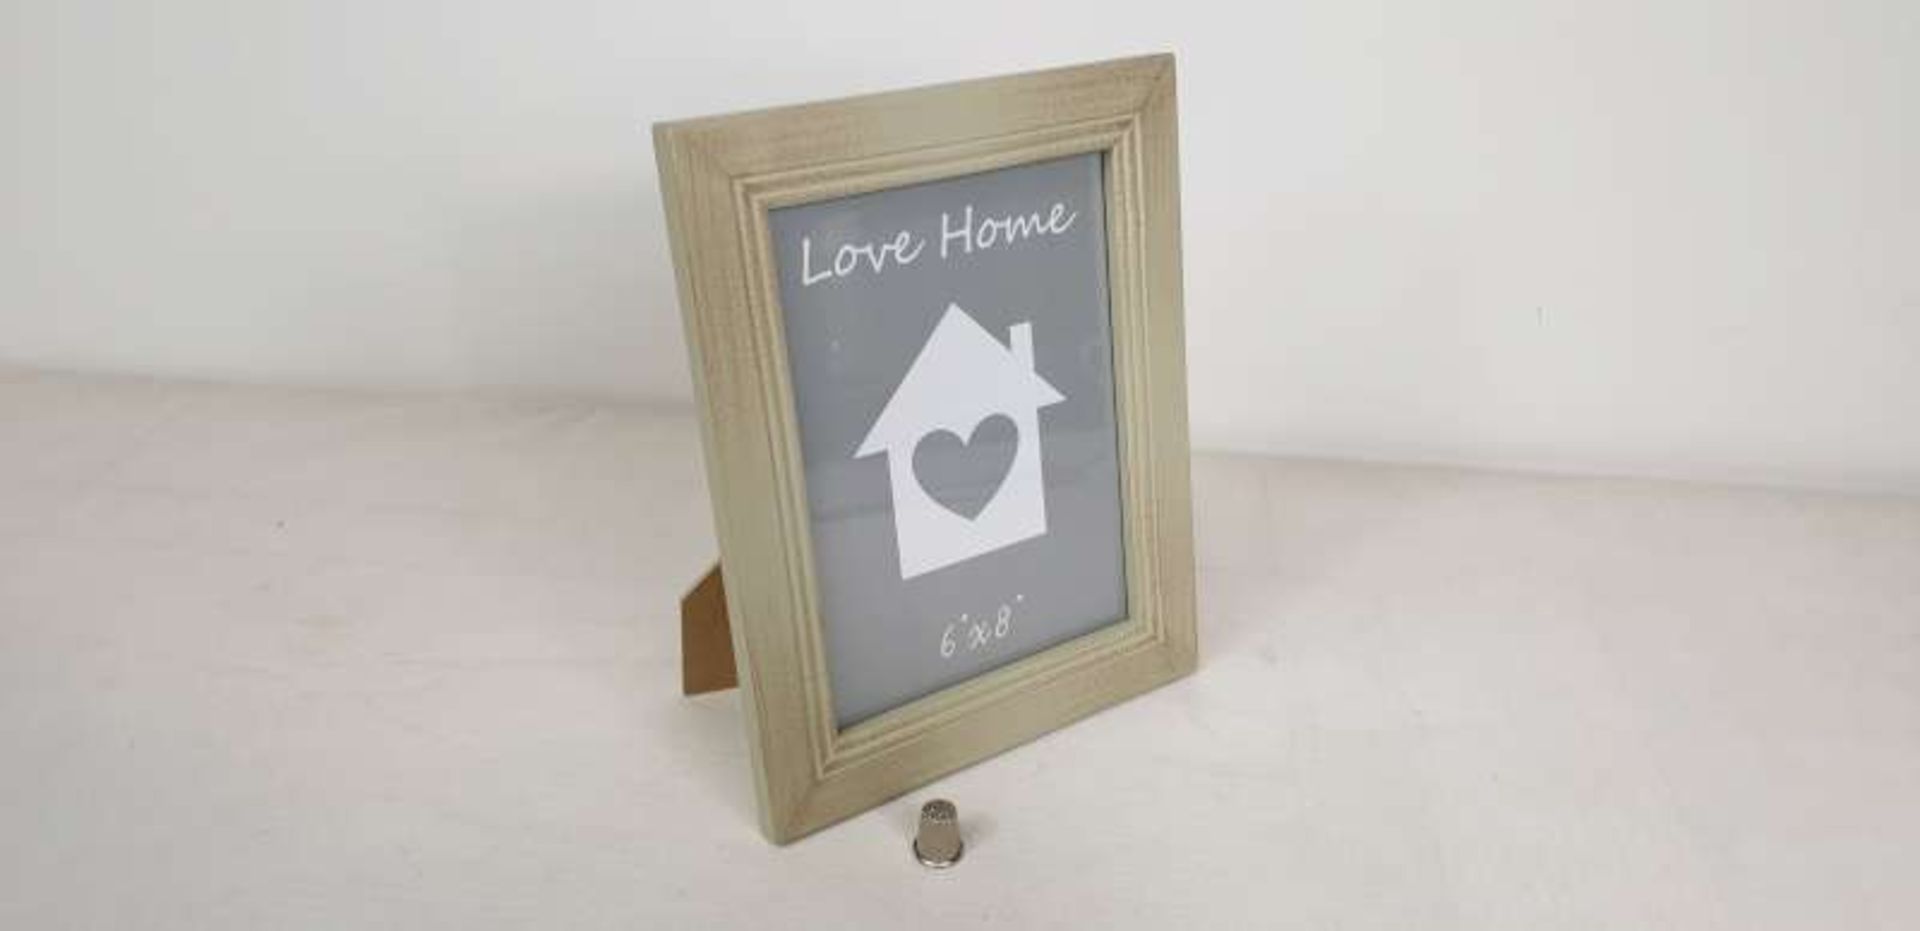 48 X BRAND NEW BOXED LOVE HOME PHOTO FRAMES SIZE 6" X 8" IN 4 BOXES